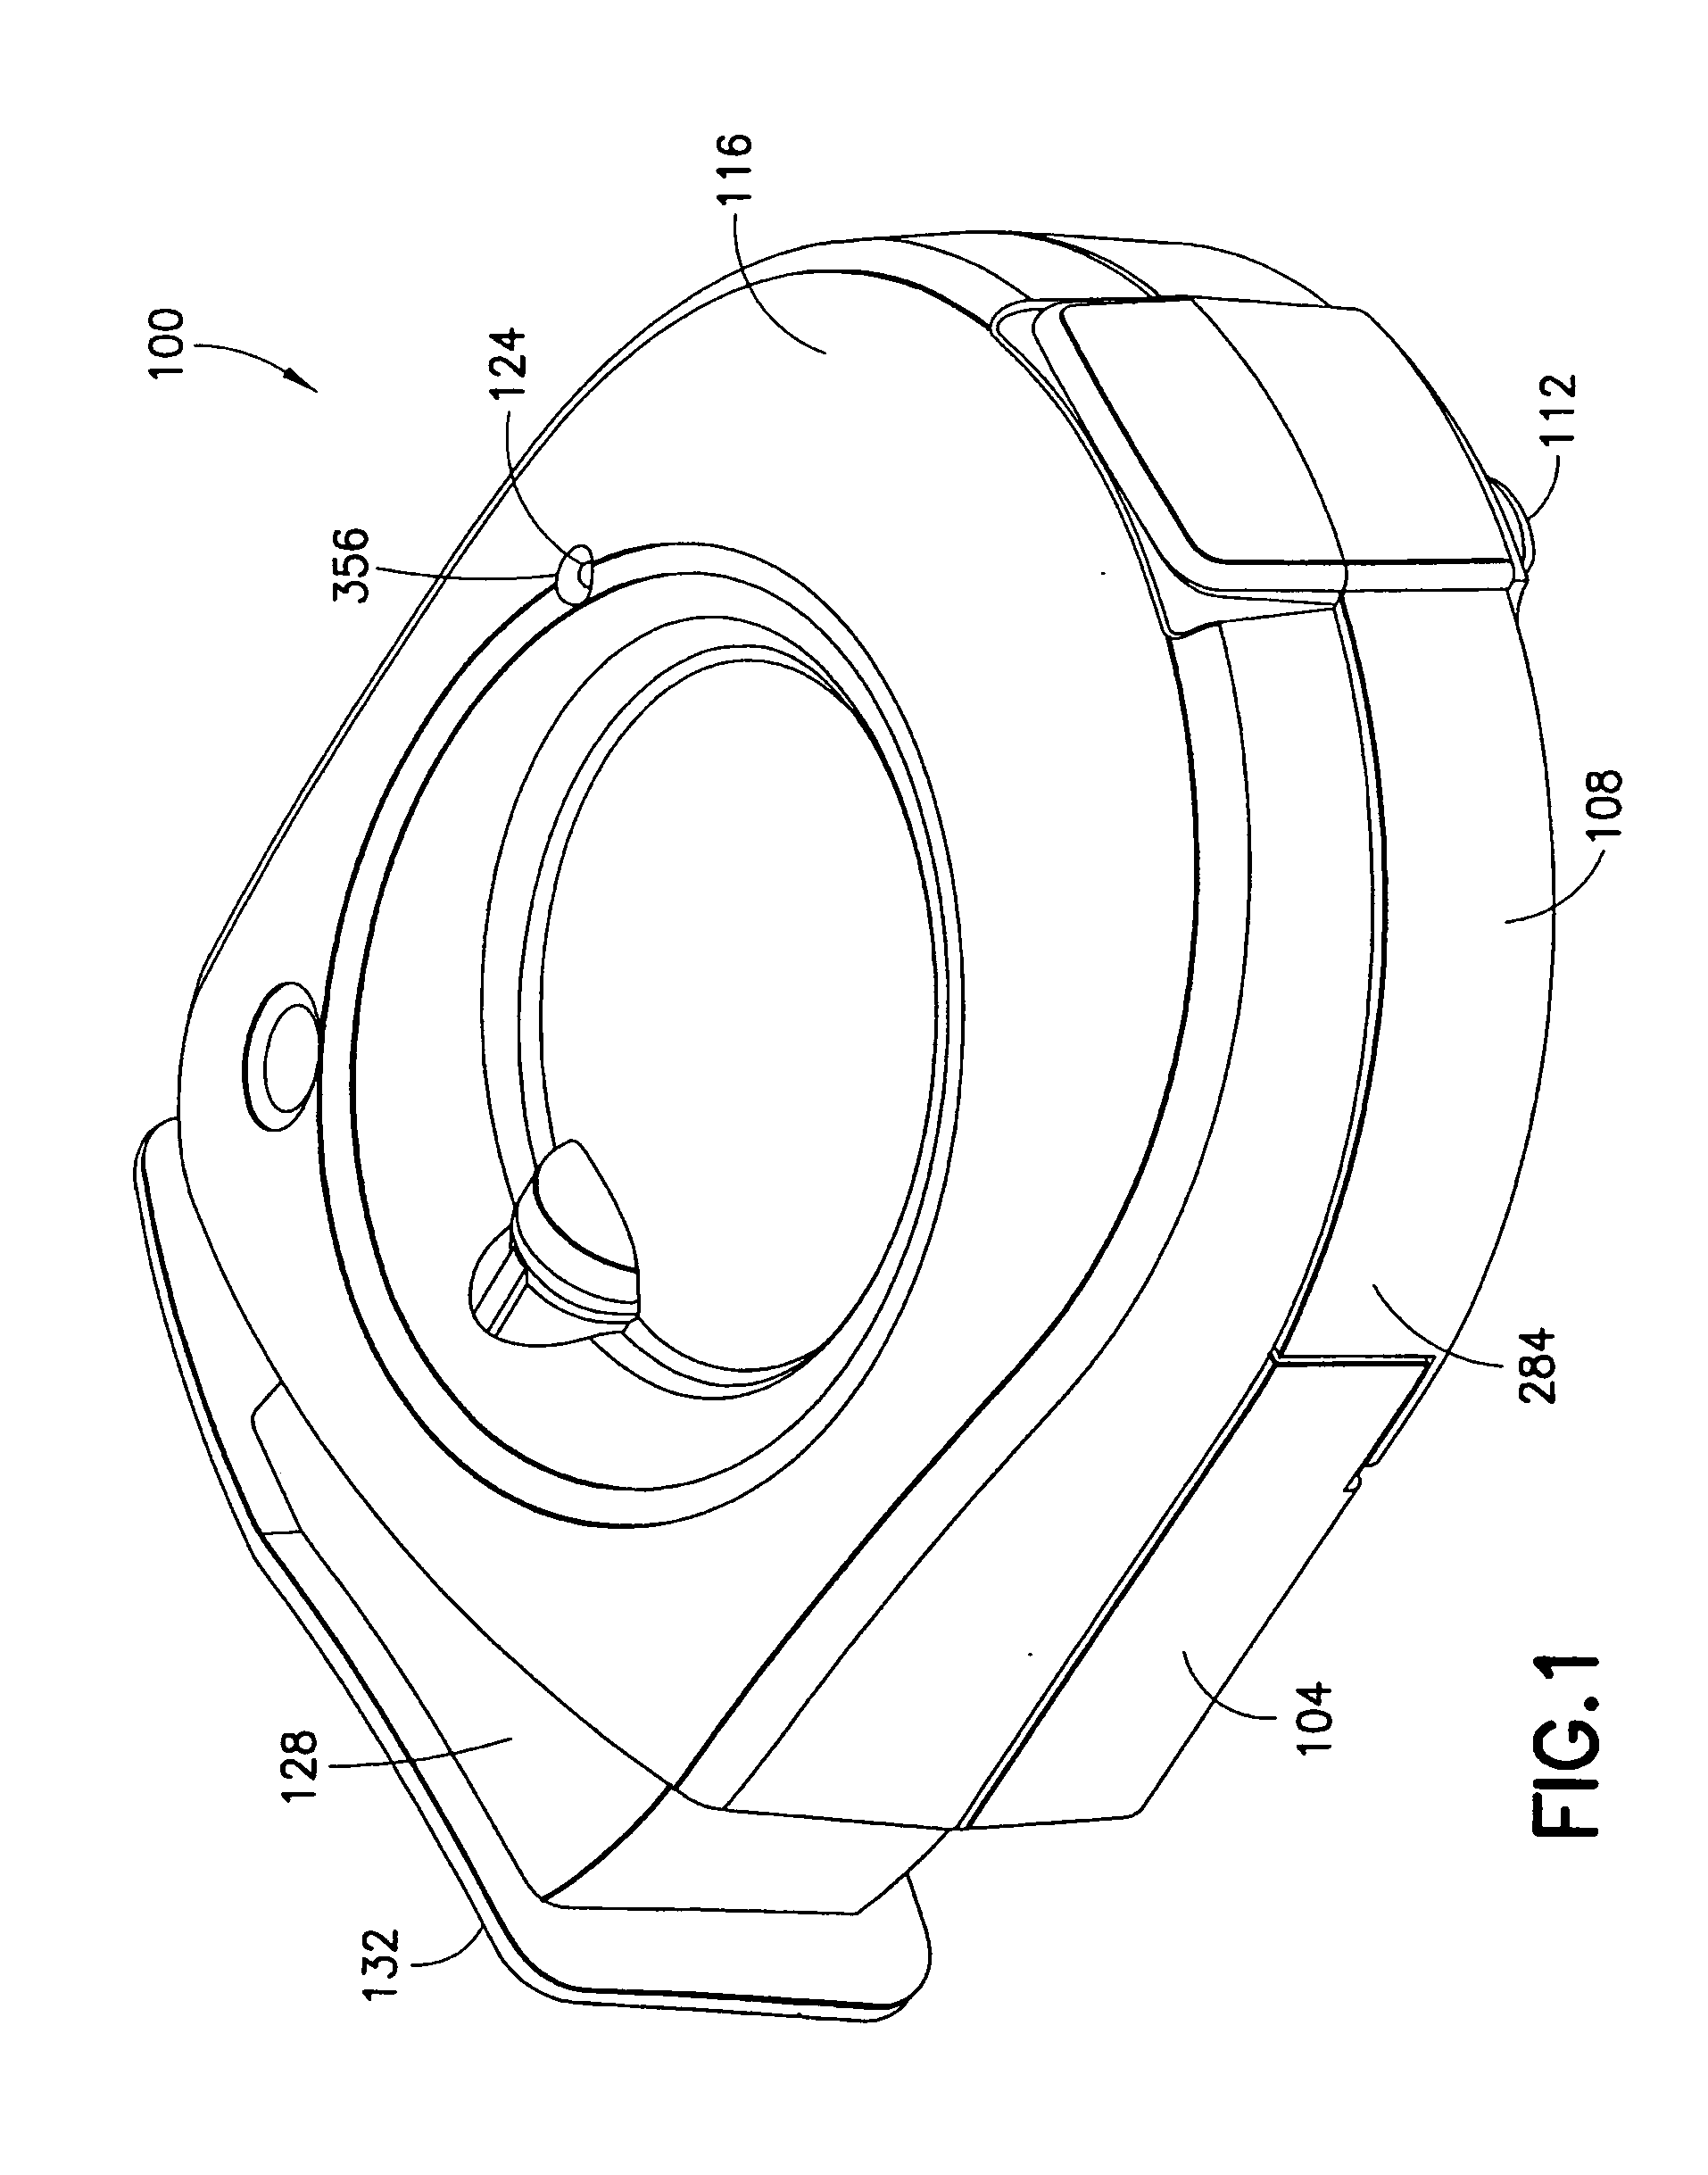 Self-injection device having needle cover with activation preventer